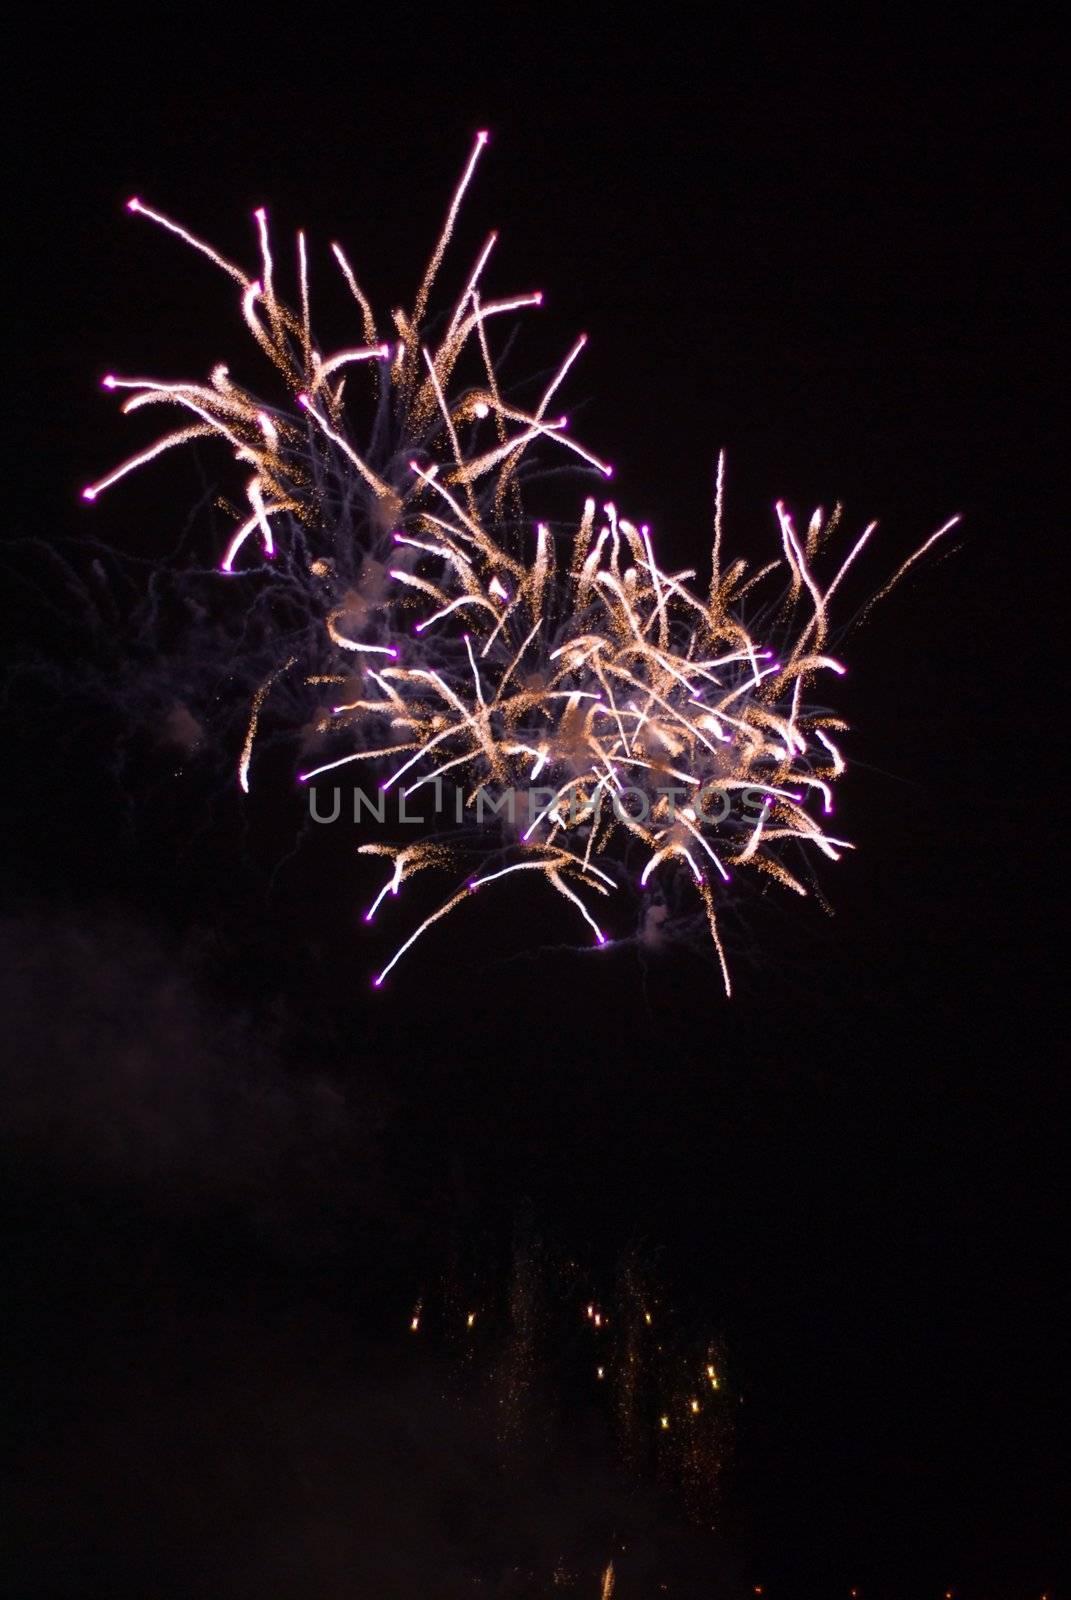 Colourful firework show - this photo is part of the series.